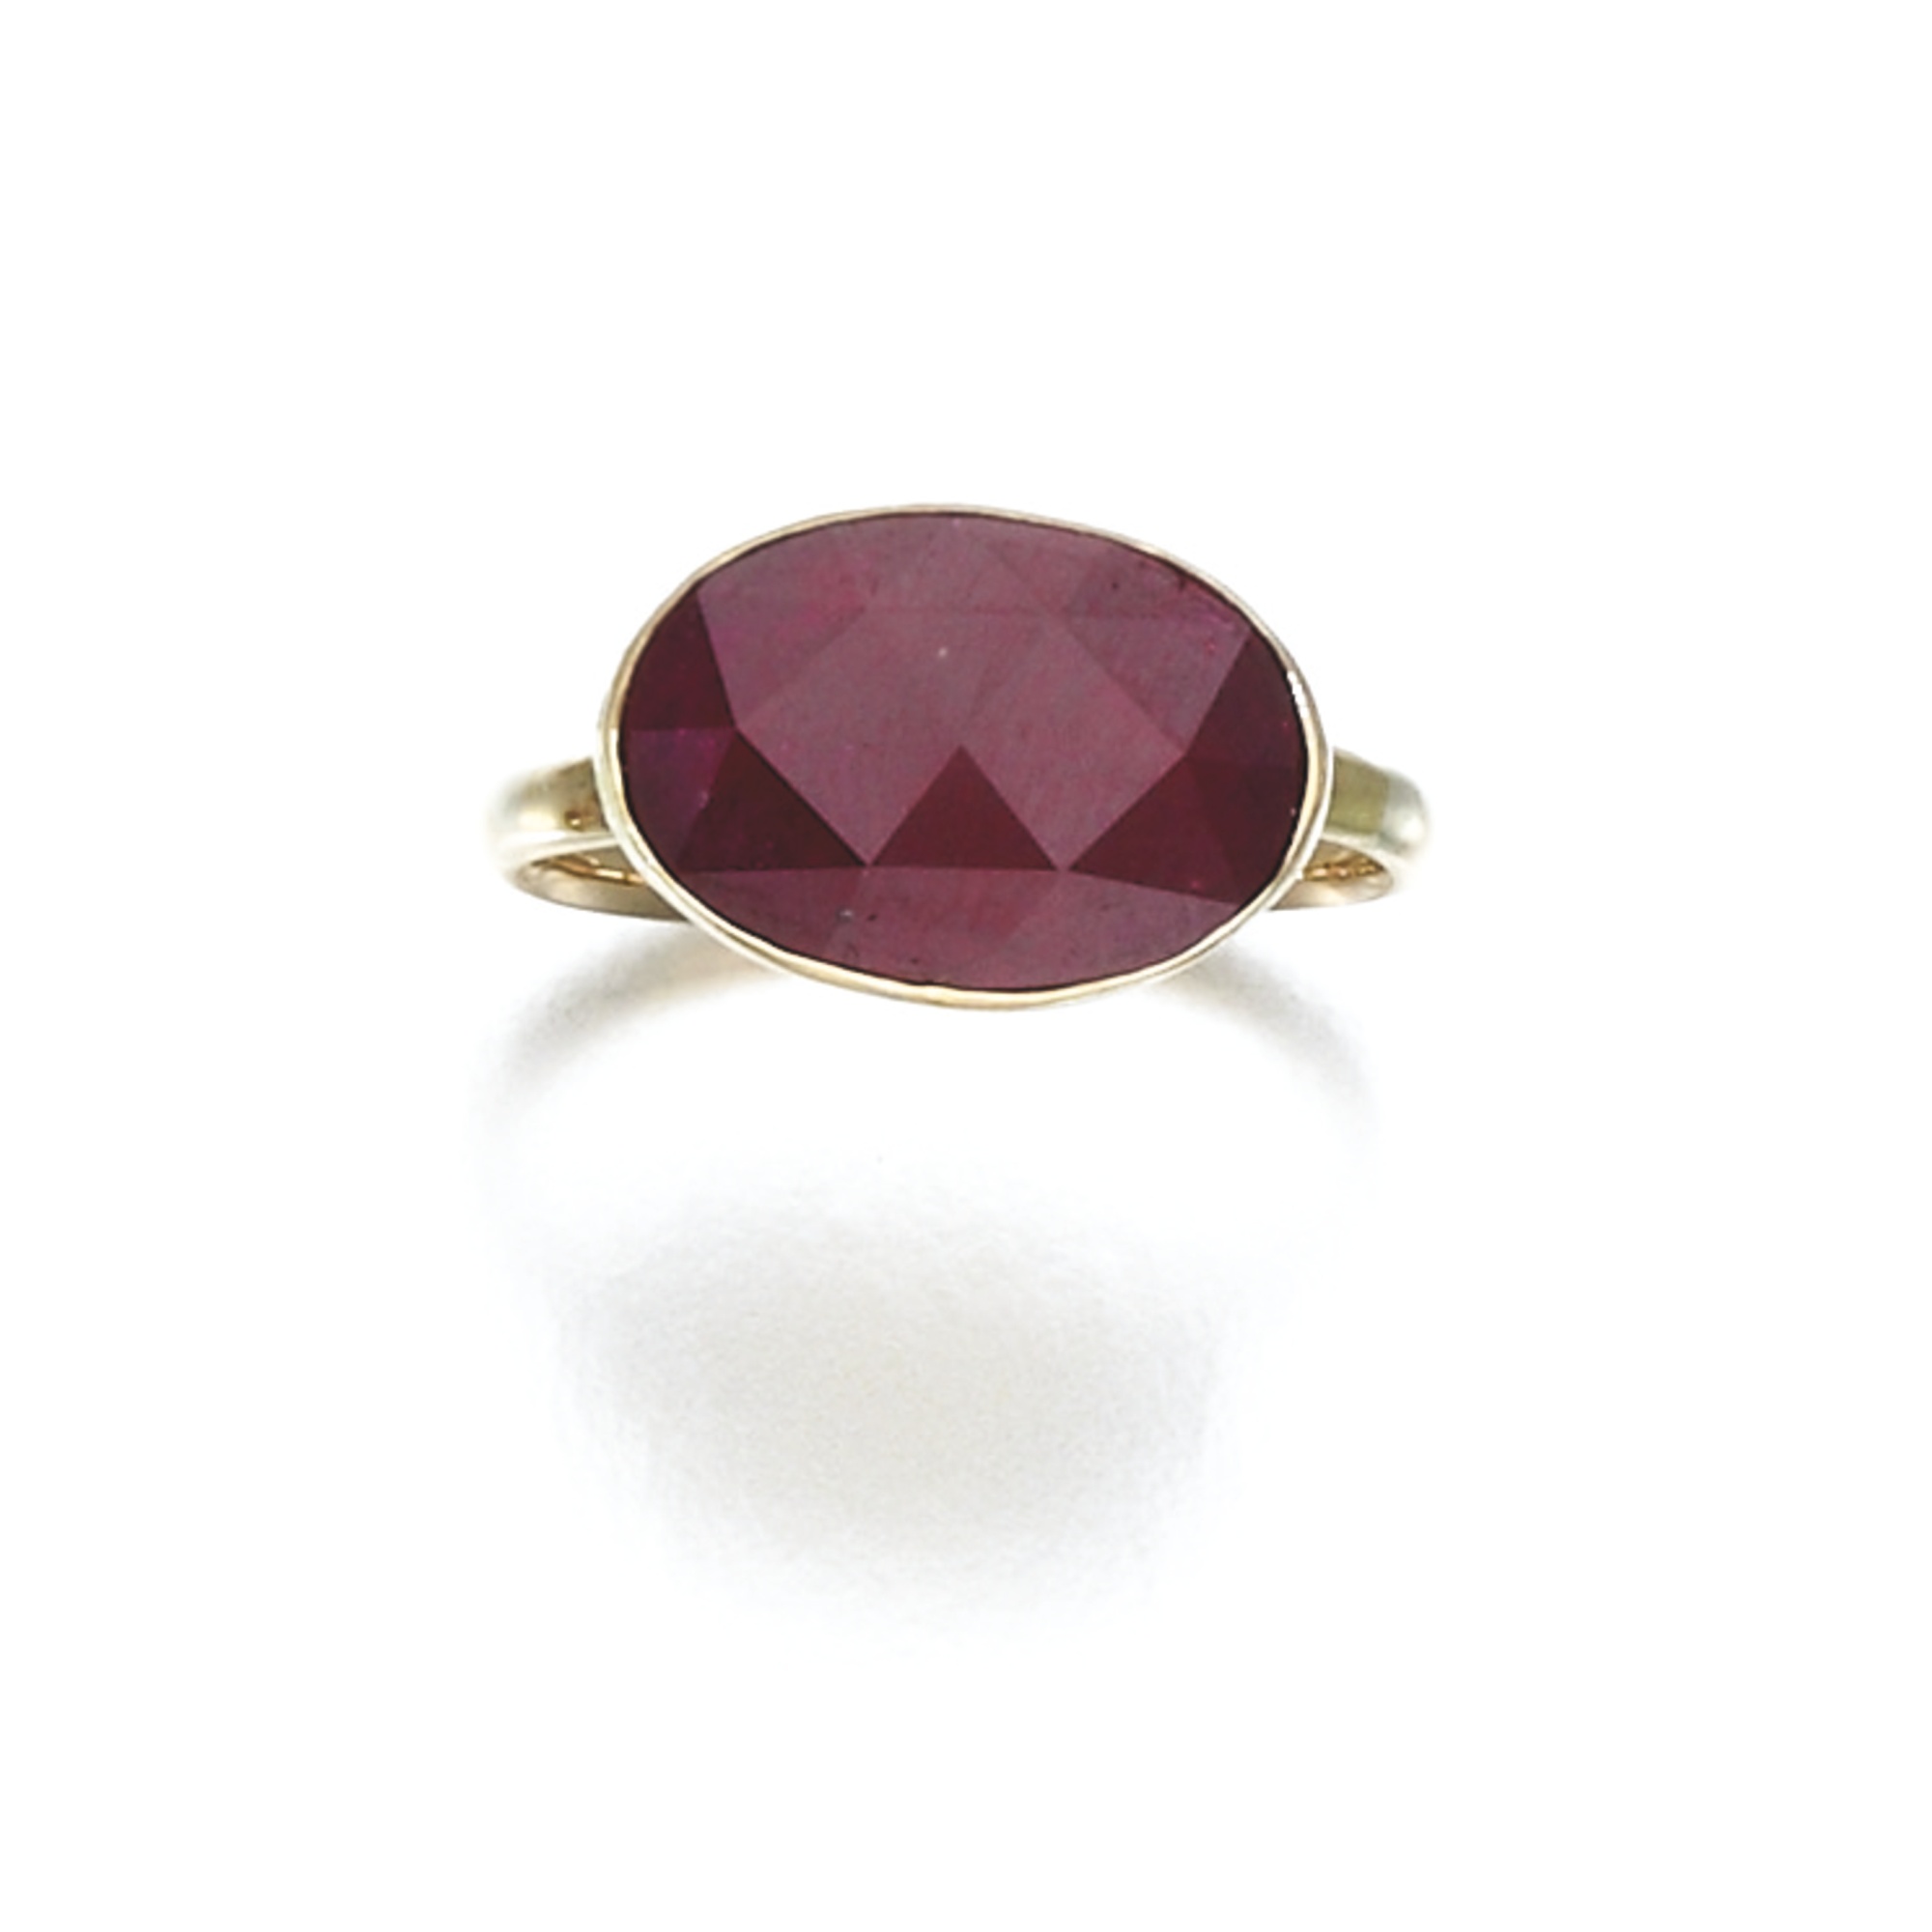  Collet-set with a faceted oval ruby. Photo by Sotheby's Auction House.&nbsp; 